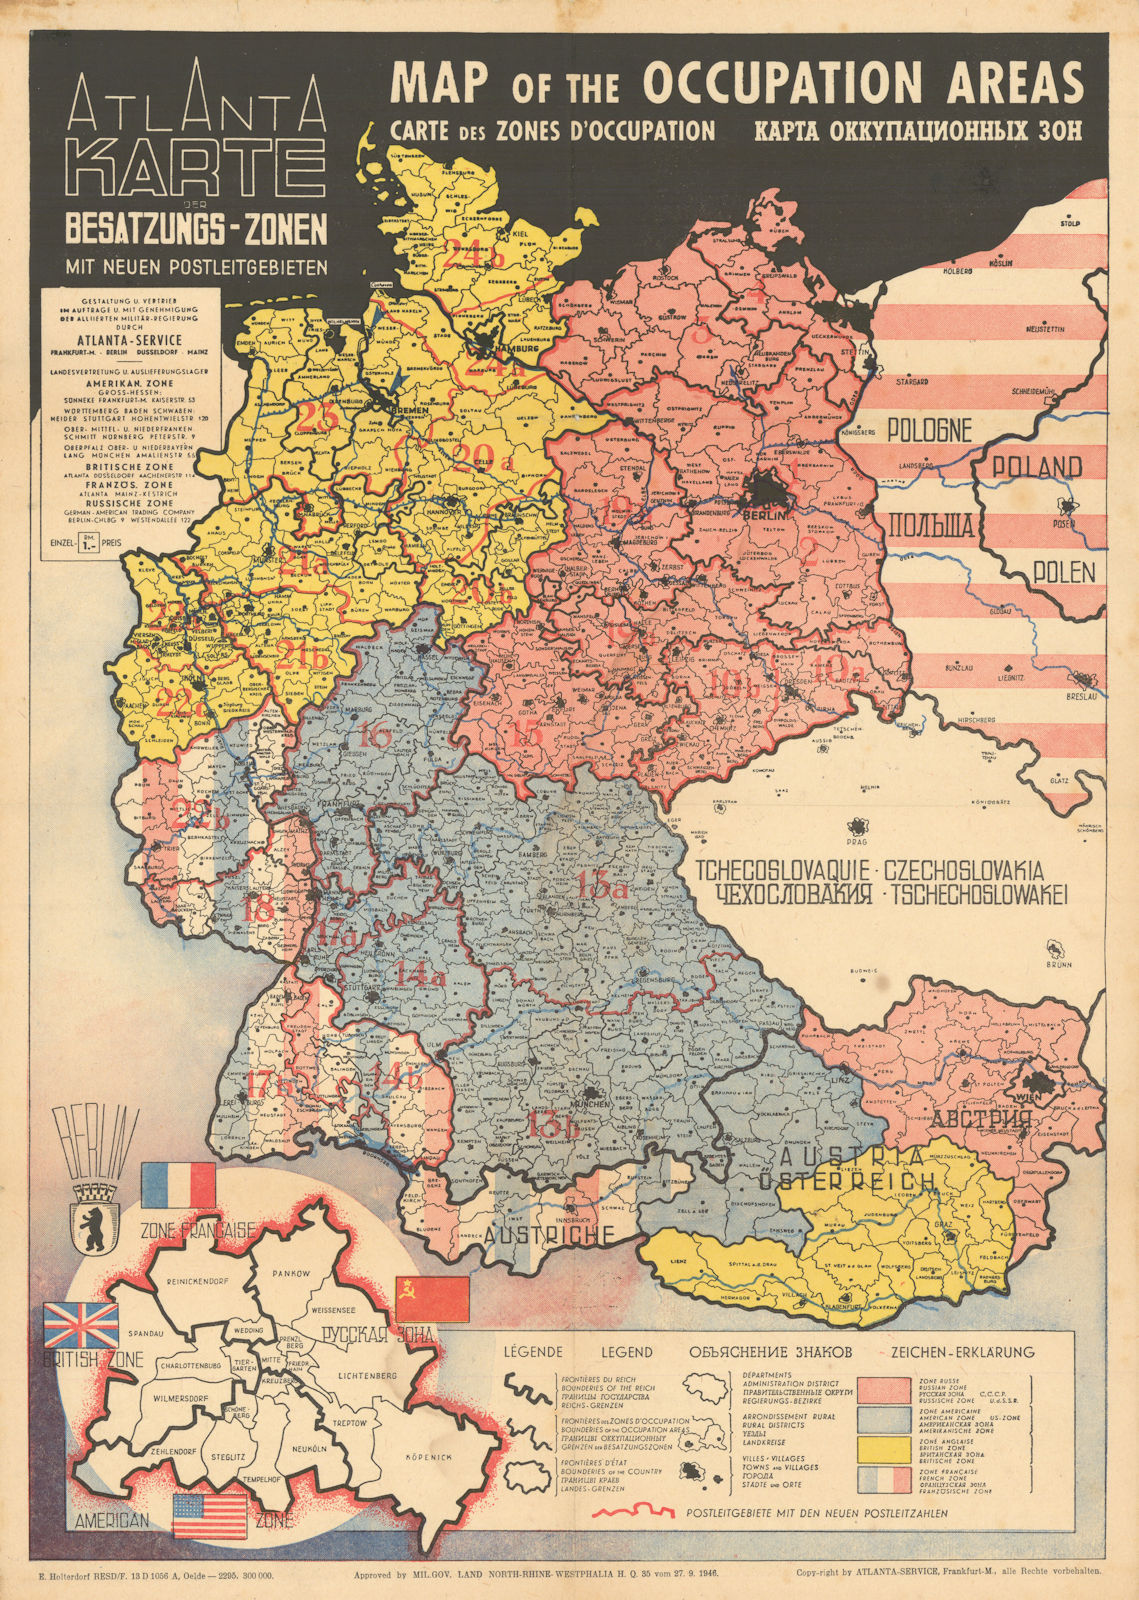 Associate Product Atlanta Karte der Besatzungs-Zonen. Map of the Occupation Areas of Germany 1946